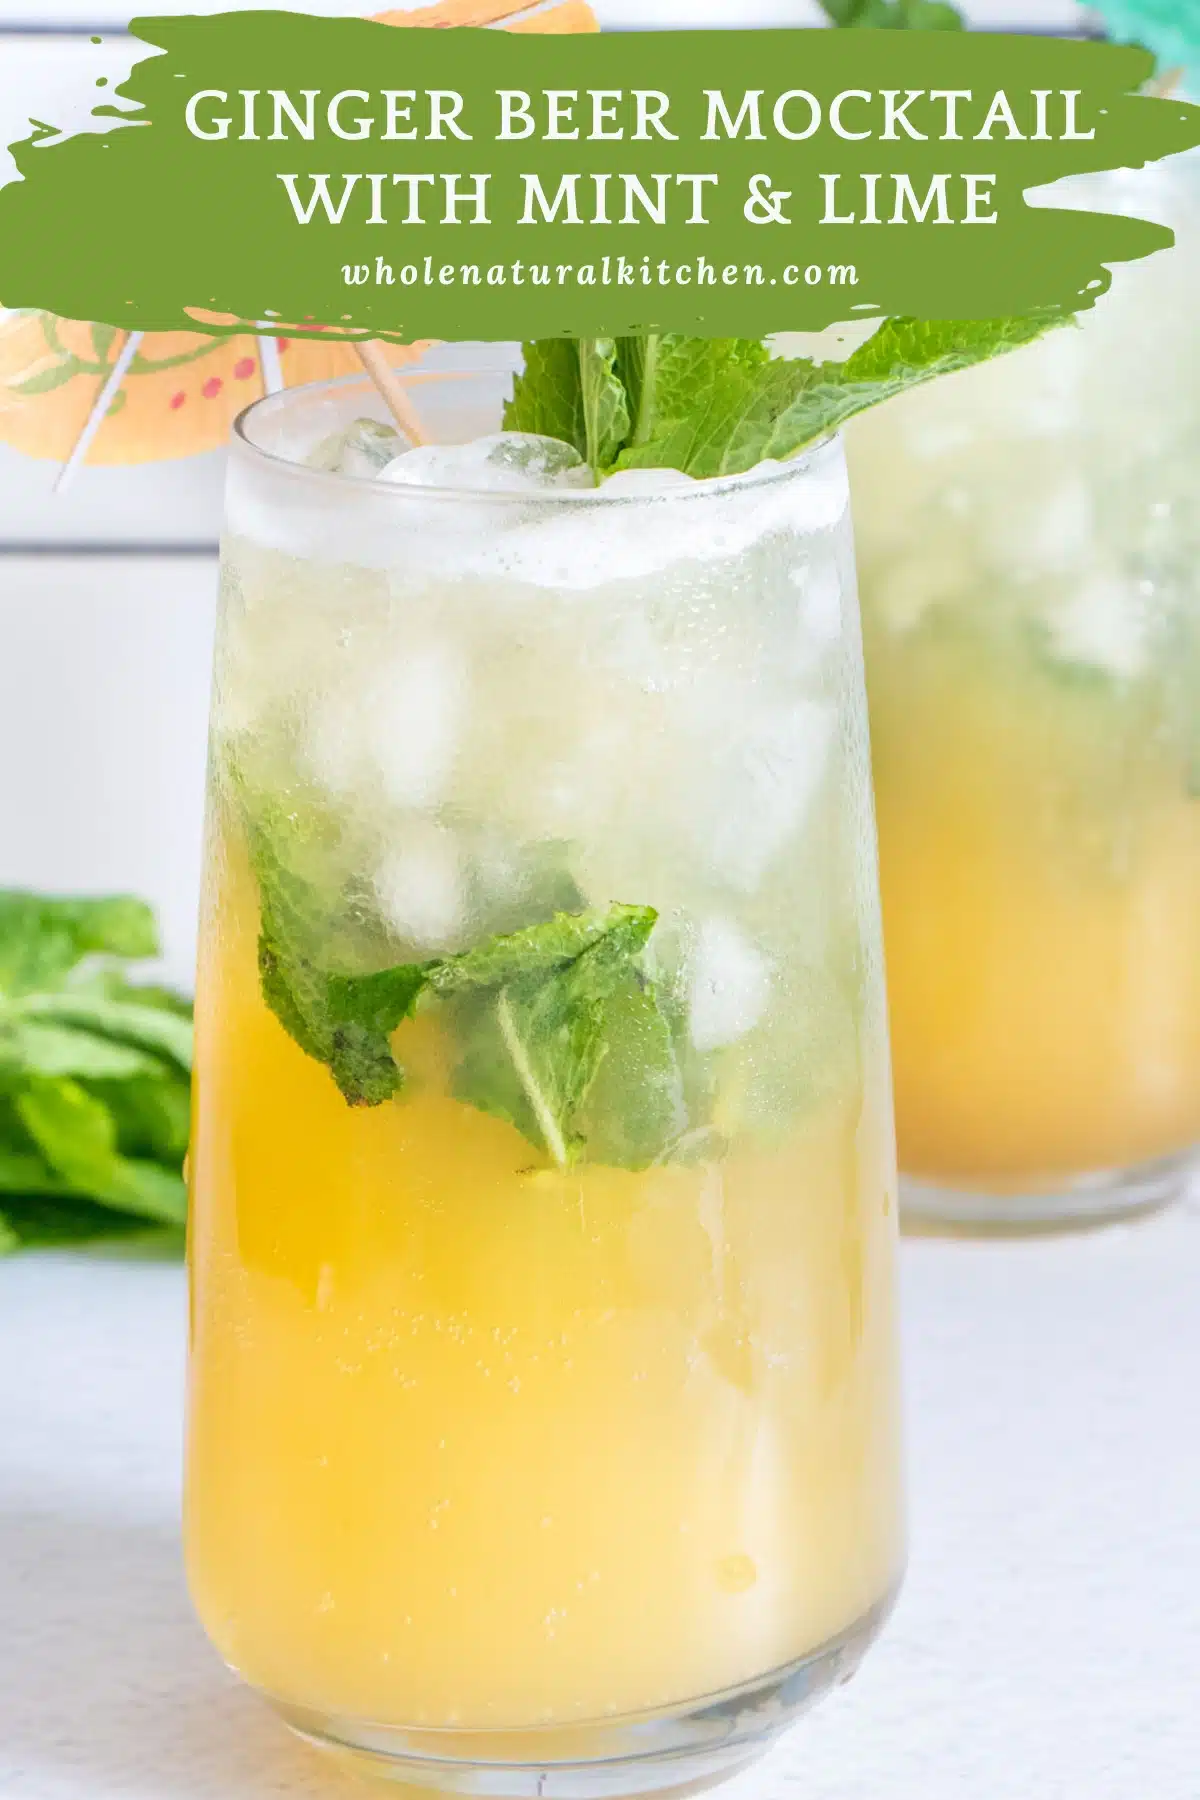 A pinterest poster image showing the name of the recipe and website at the top with a ginger beer mocktail underneath.